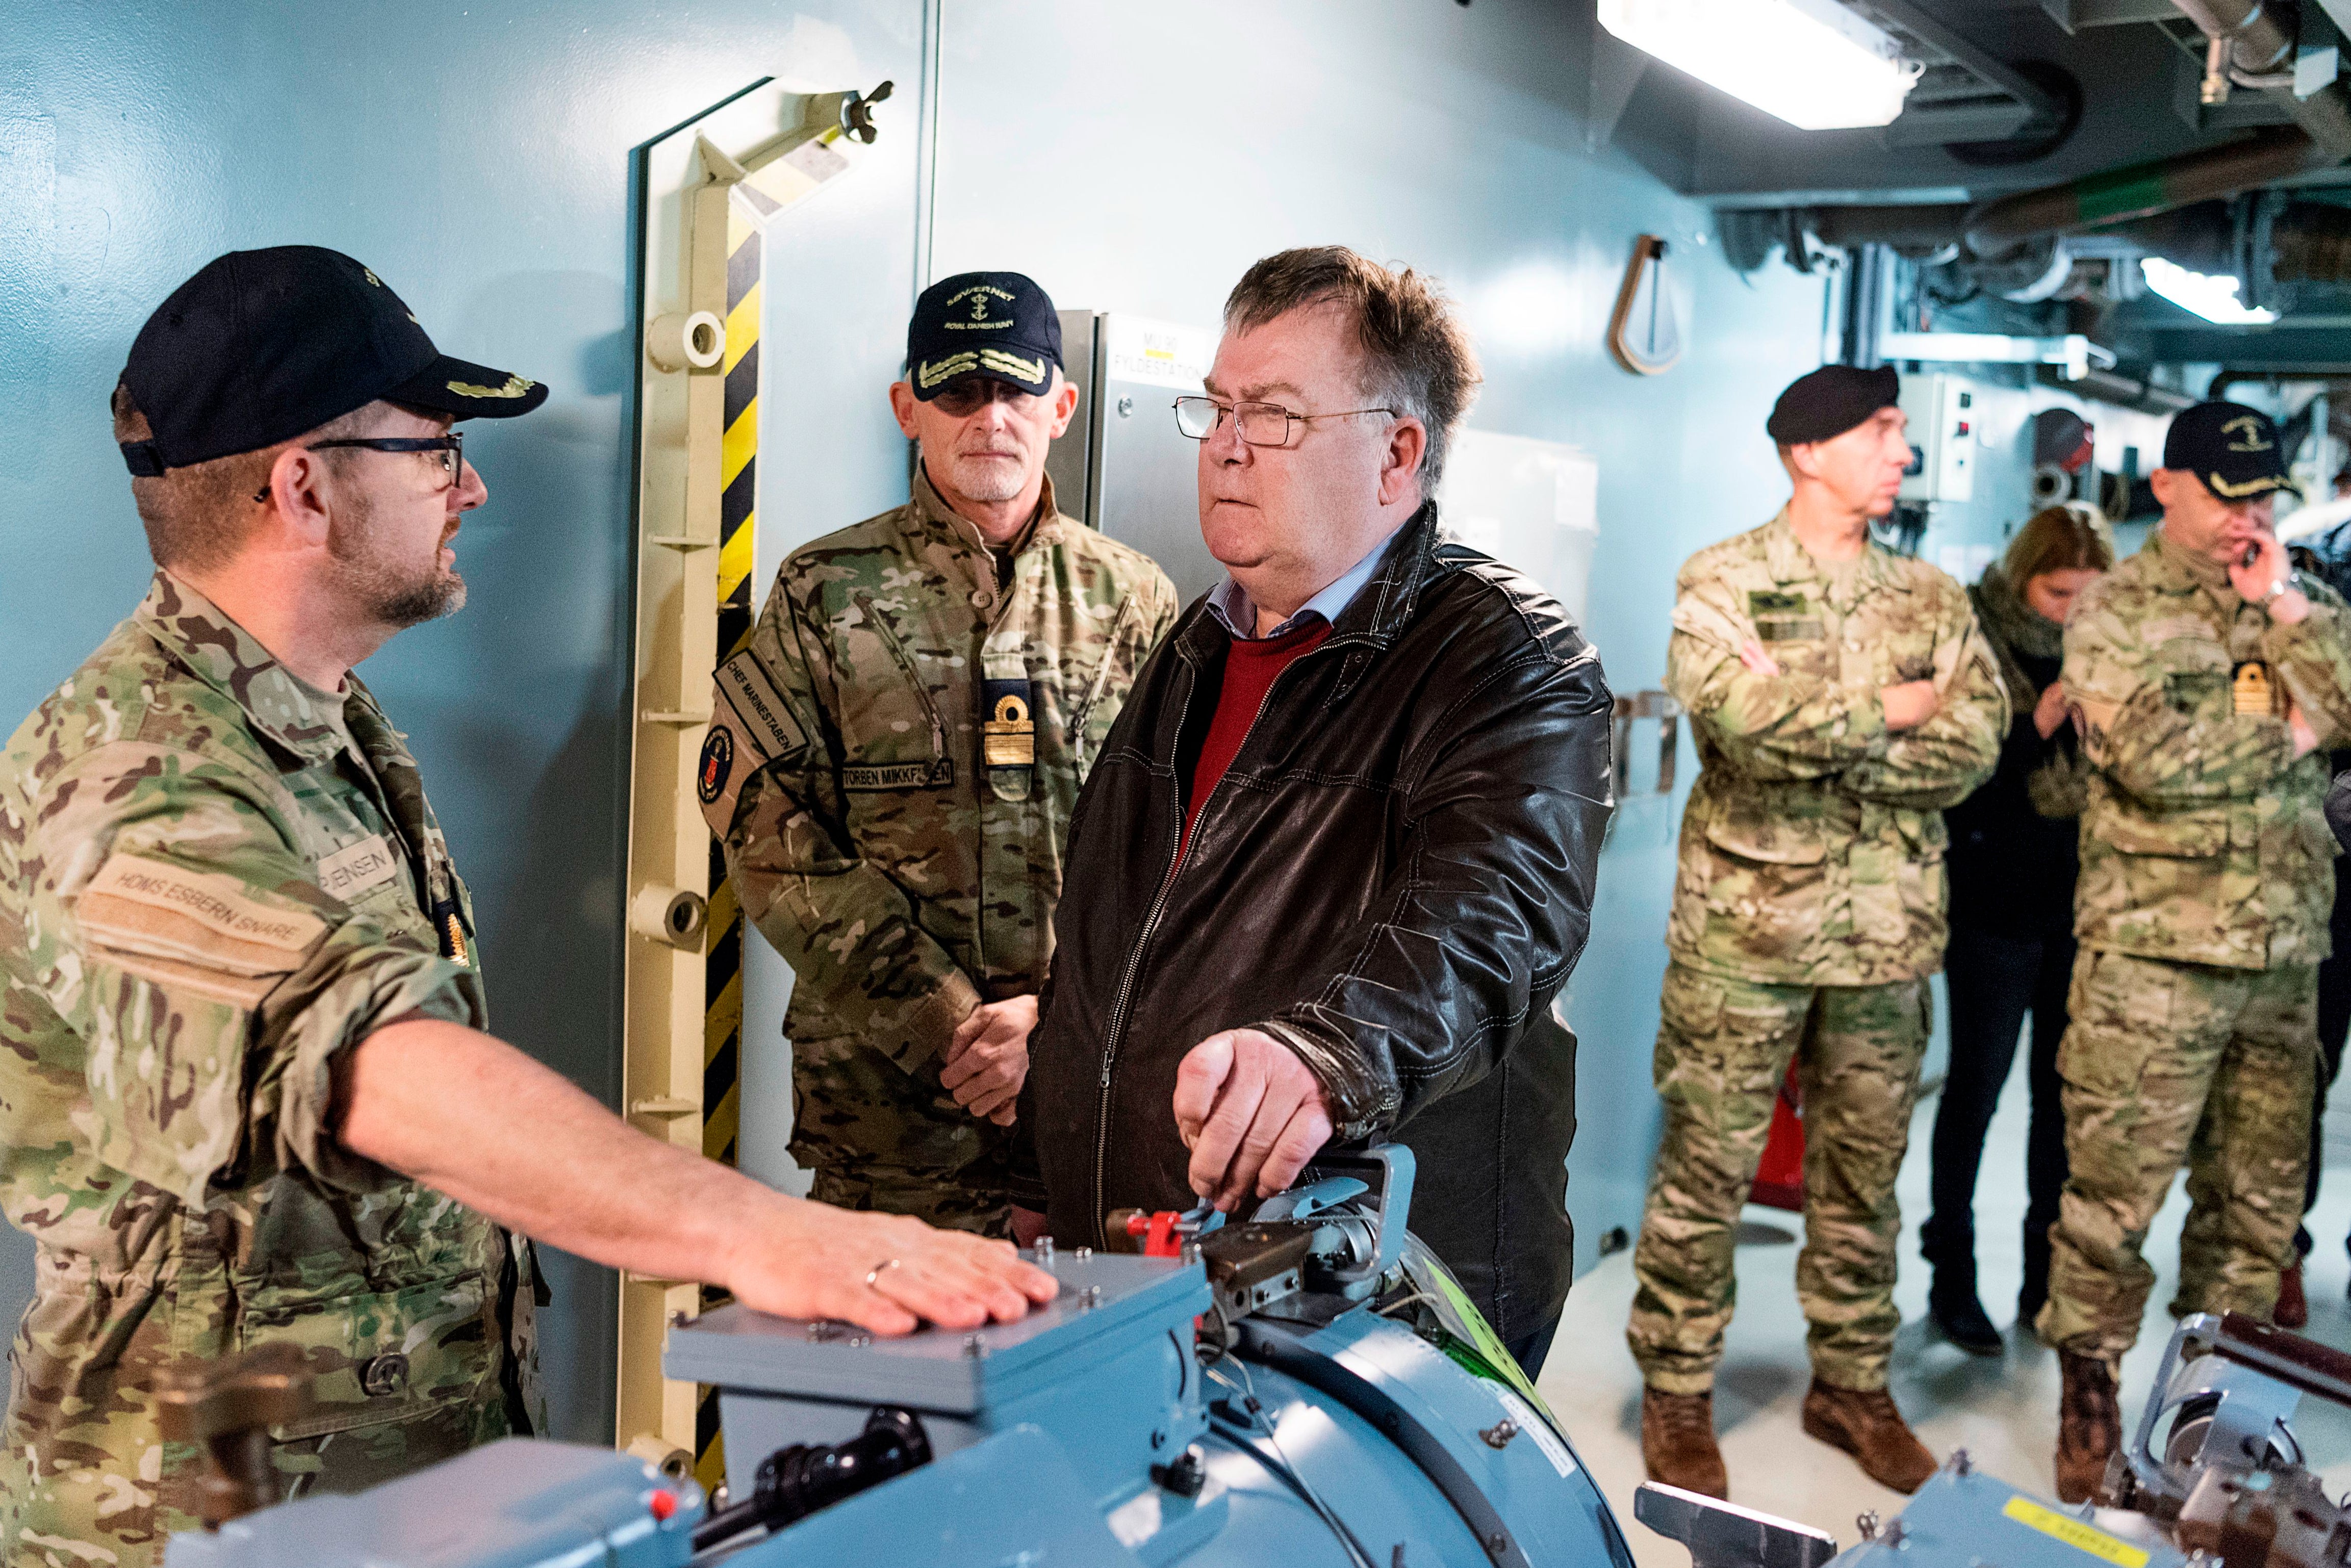 Claus Hjort Frederiksen meets crew on the Danish warship Esbern Snare during his time as defence minister